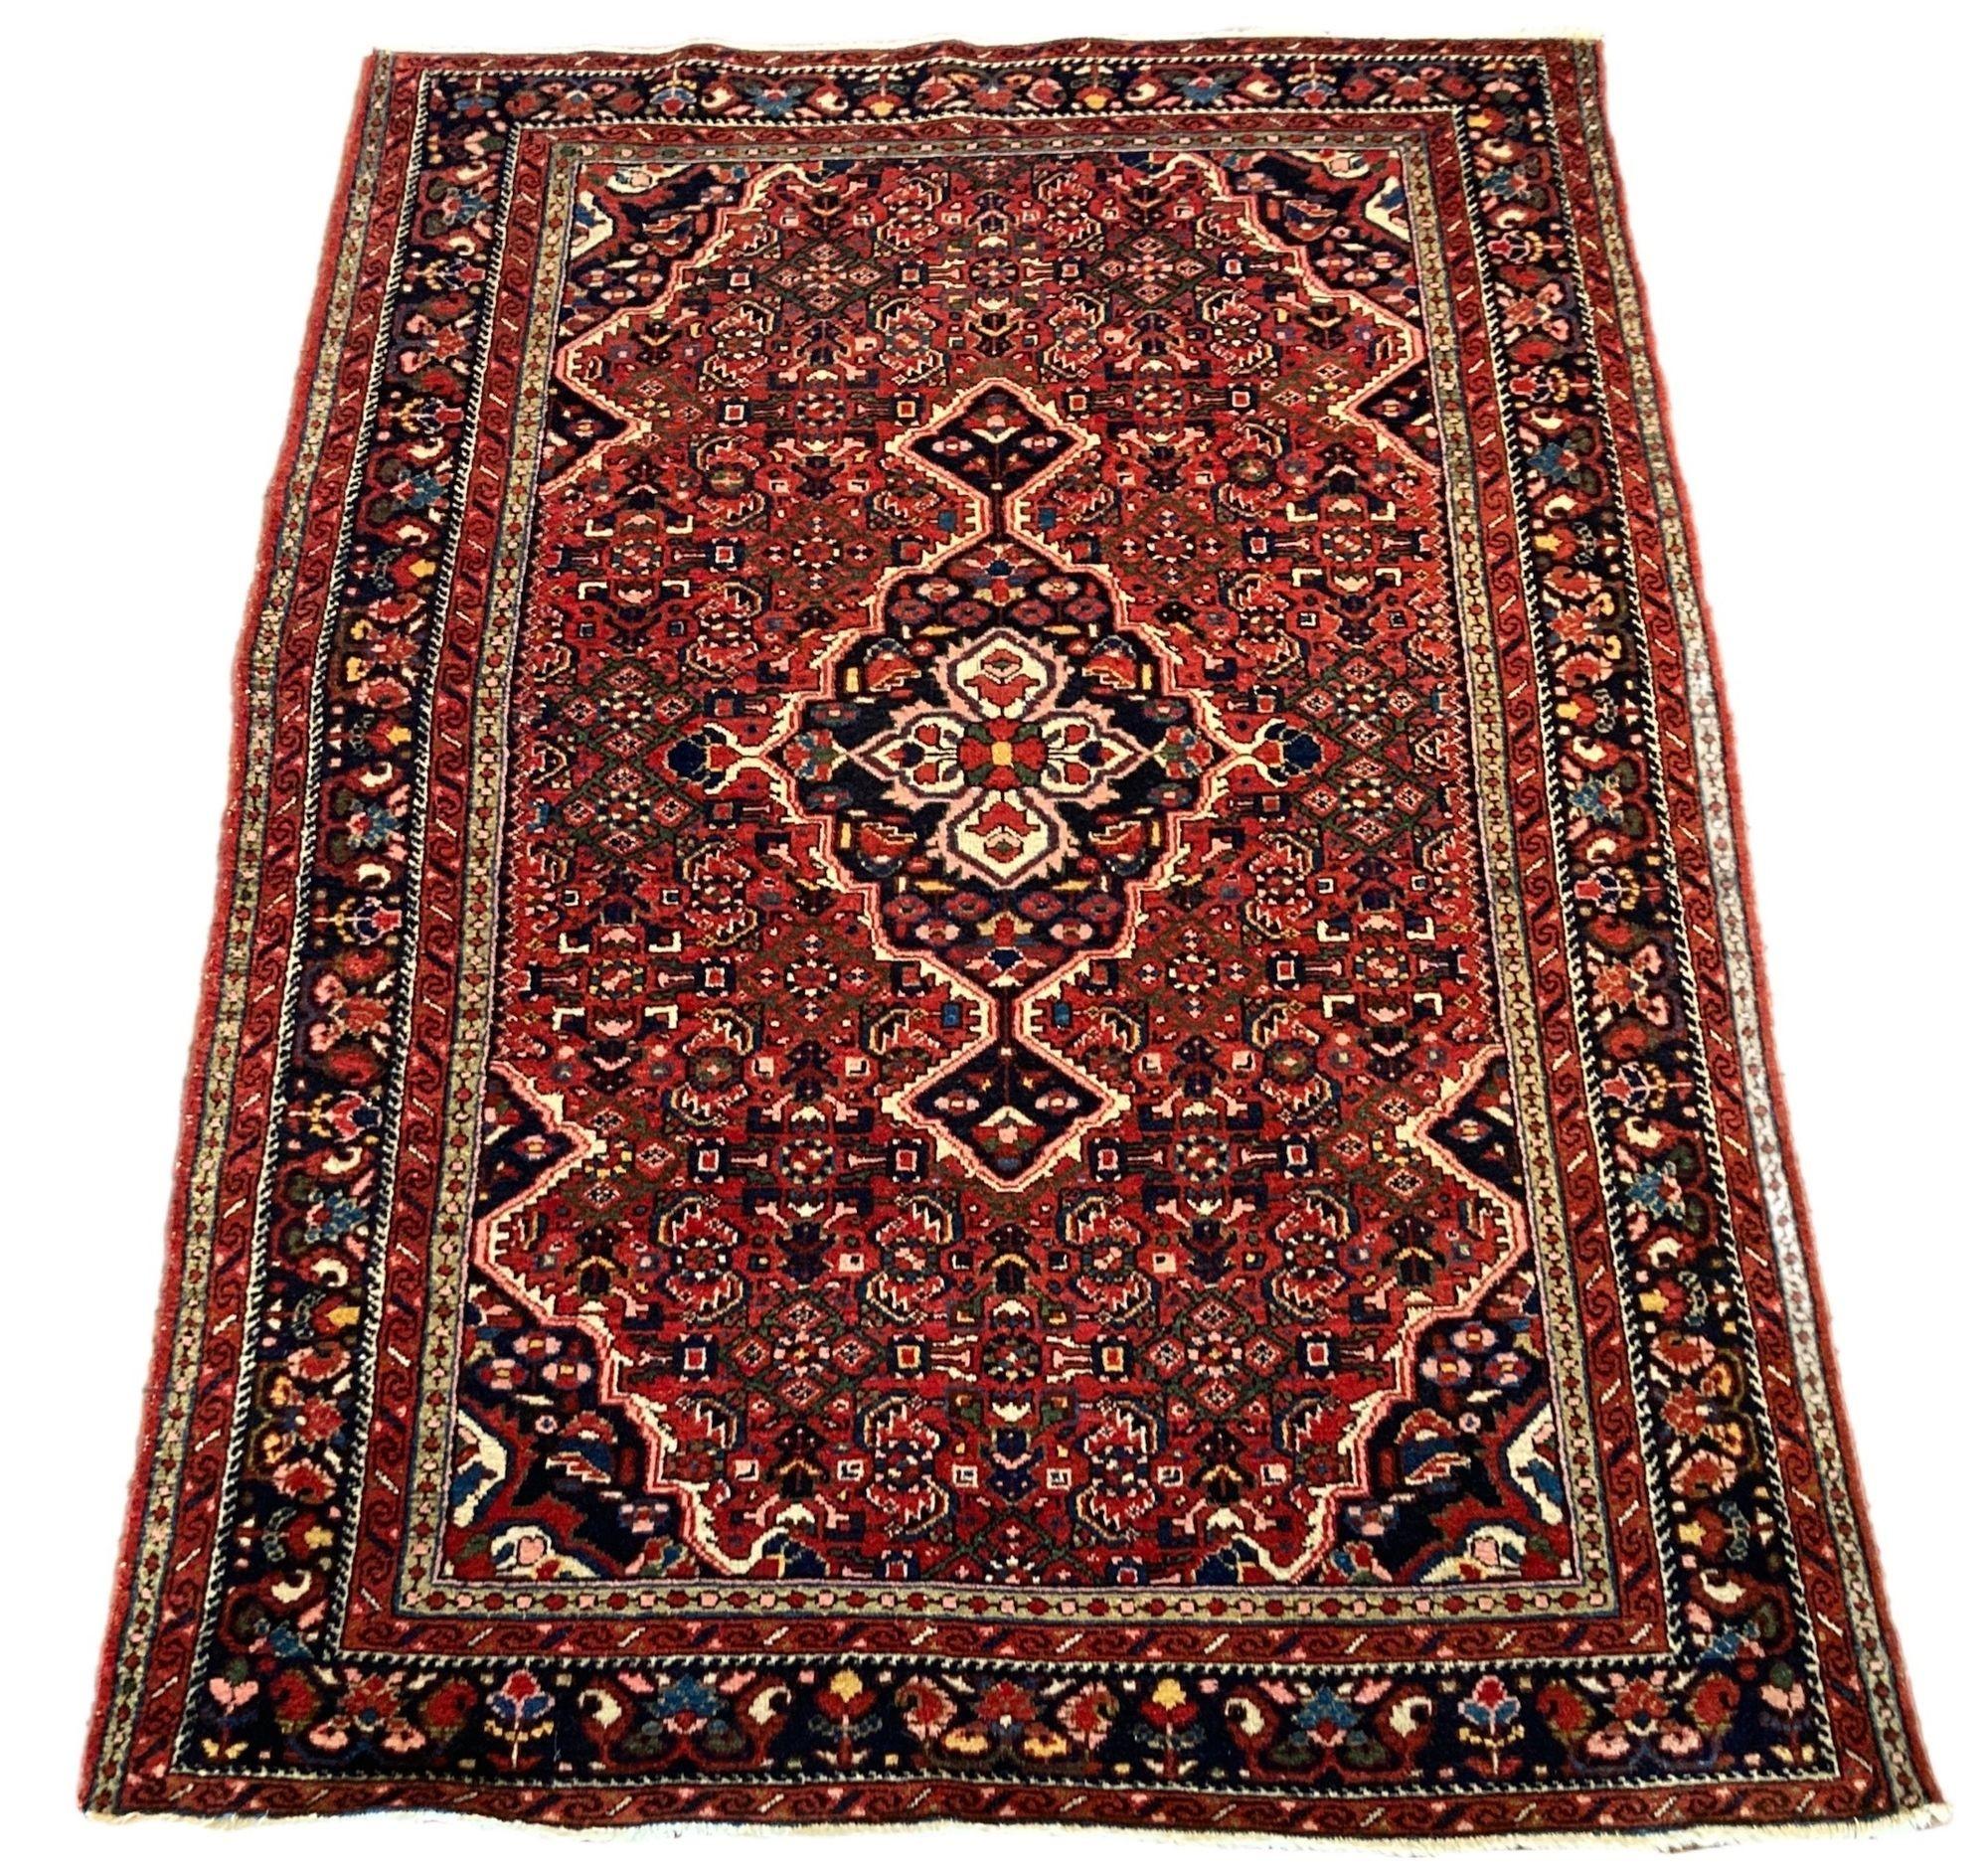 A lovely antique Hamadan rug, handwoven circa 1920 featuring a Mahi design on a terracotta field around an elegant deep indigo medallion and similar border. Fabulous secondary colours, especially the light green and gold in the main design.
Size: